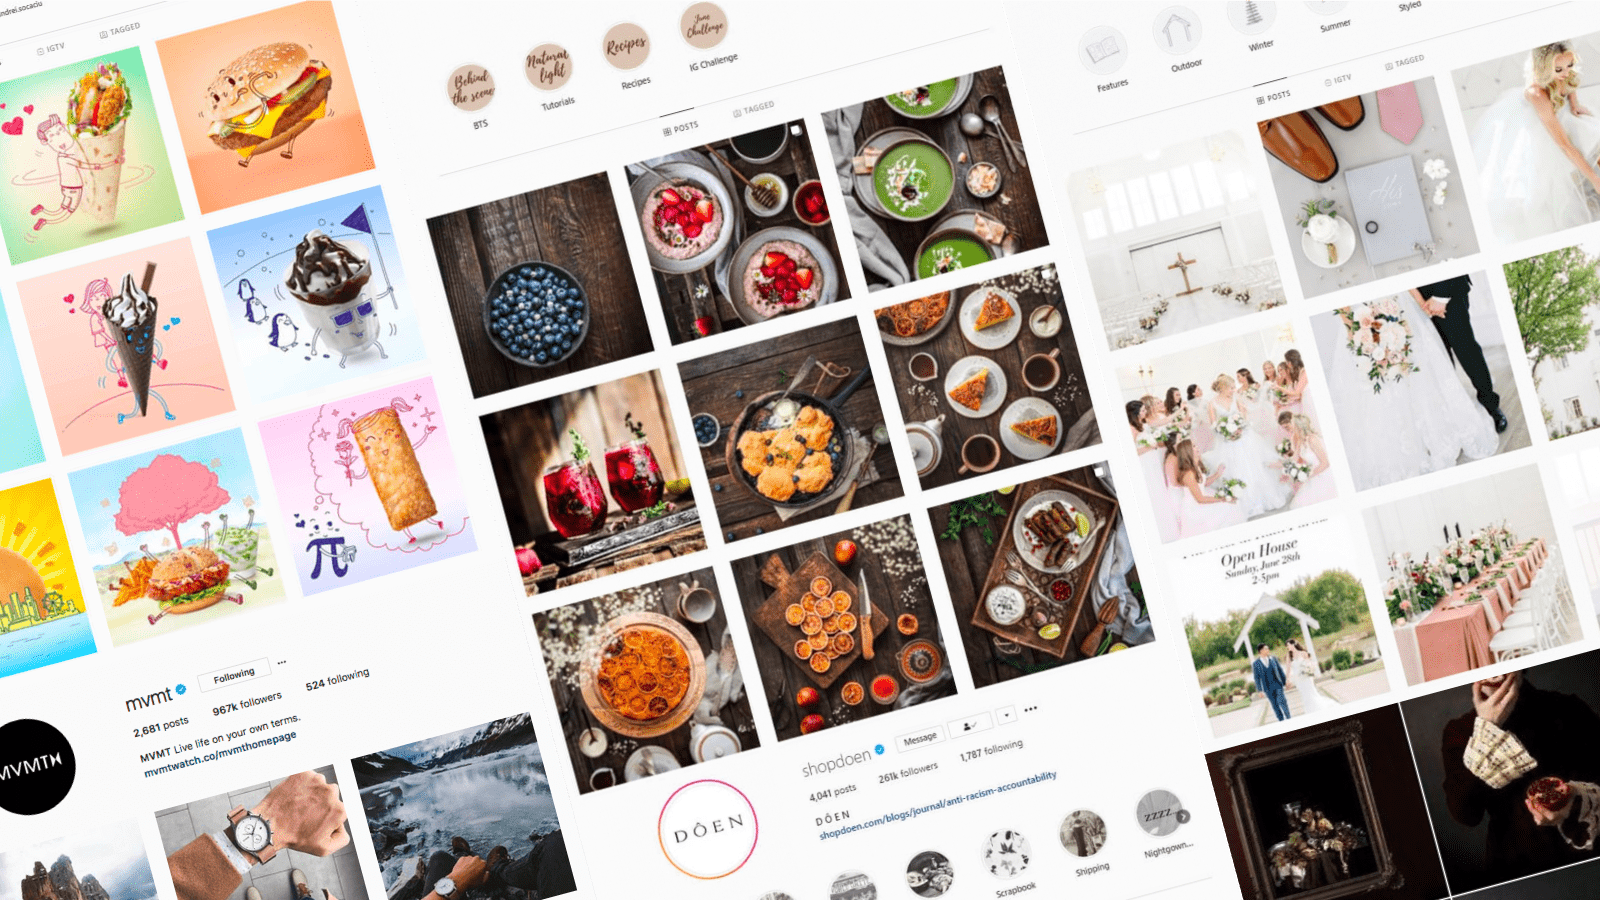 Why Should you Embed Instagram Feeds On Website